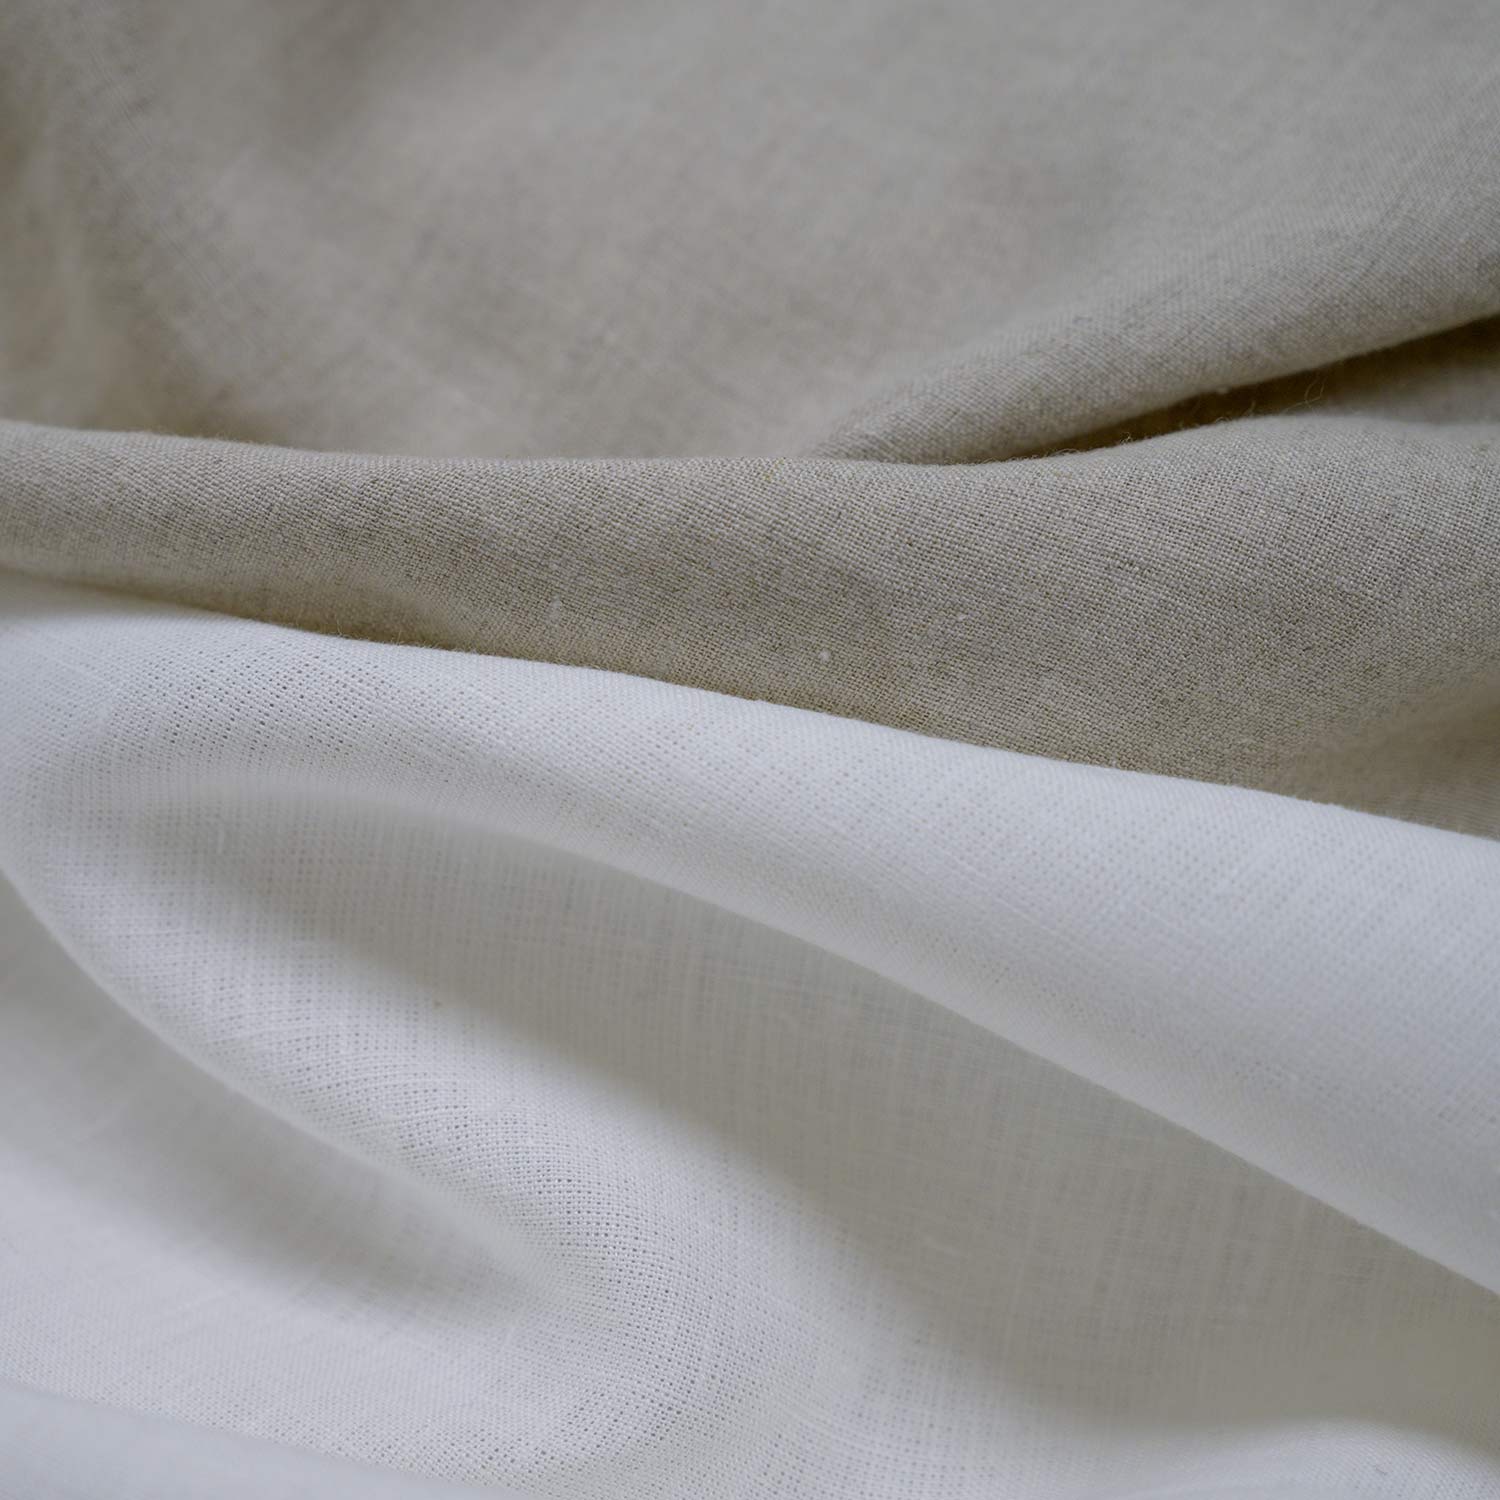 100% Organic Cotton Canvas Fabric By Rawganique Since 1997